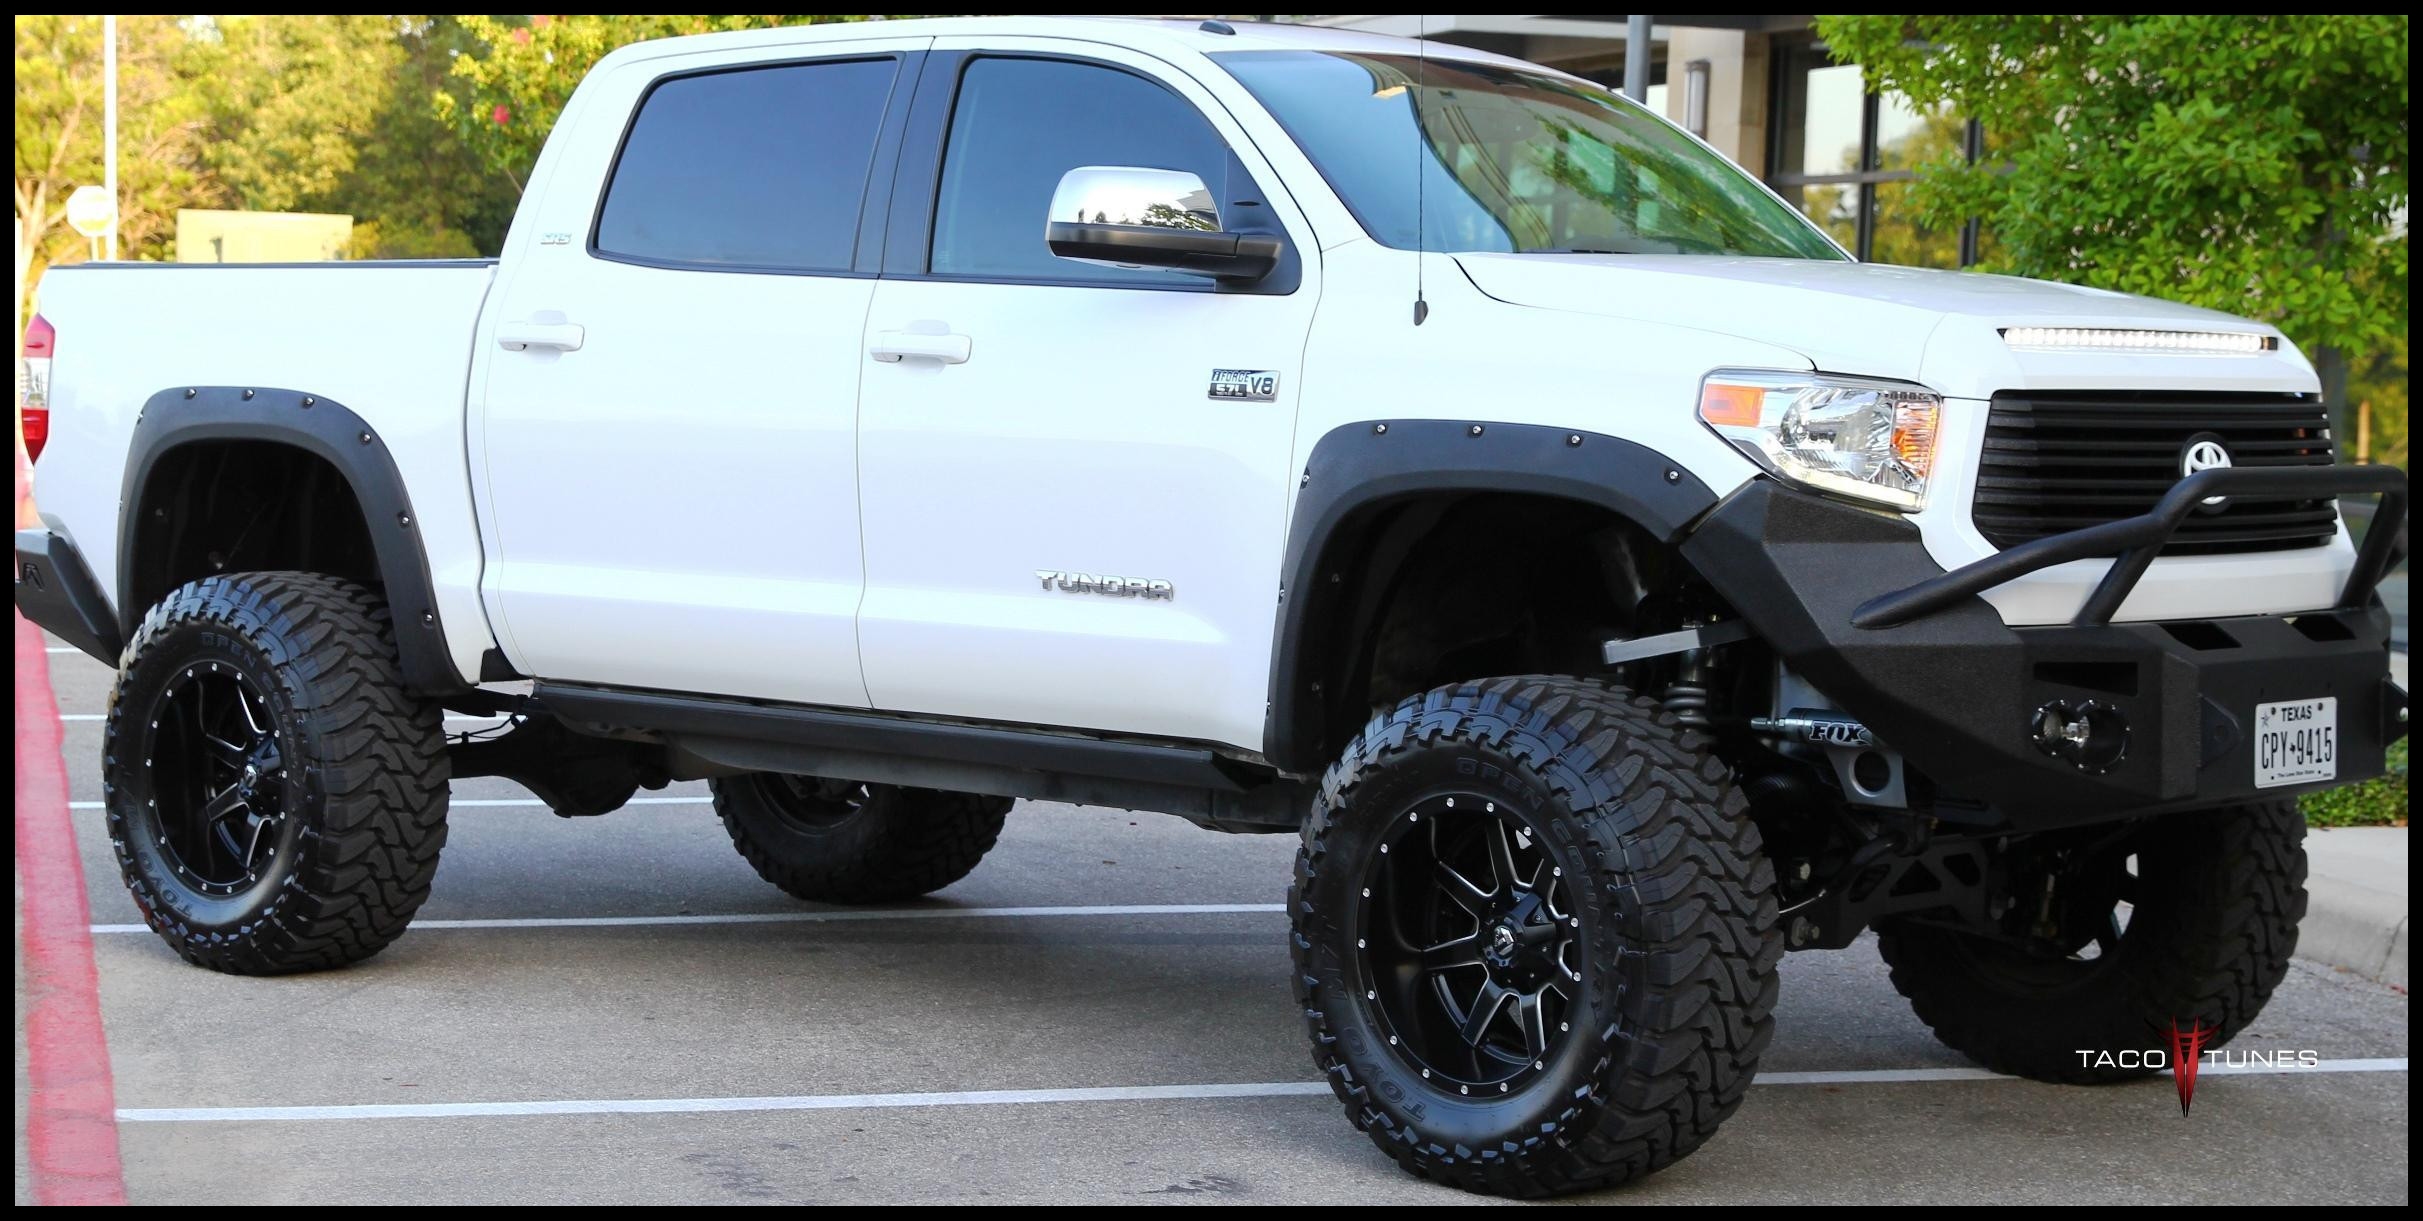 Toyota Tundra for Sale Lifted New 2014 toyota Tundra Crewmax for Sale Lifted